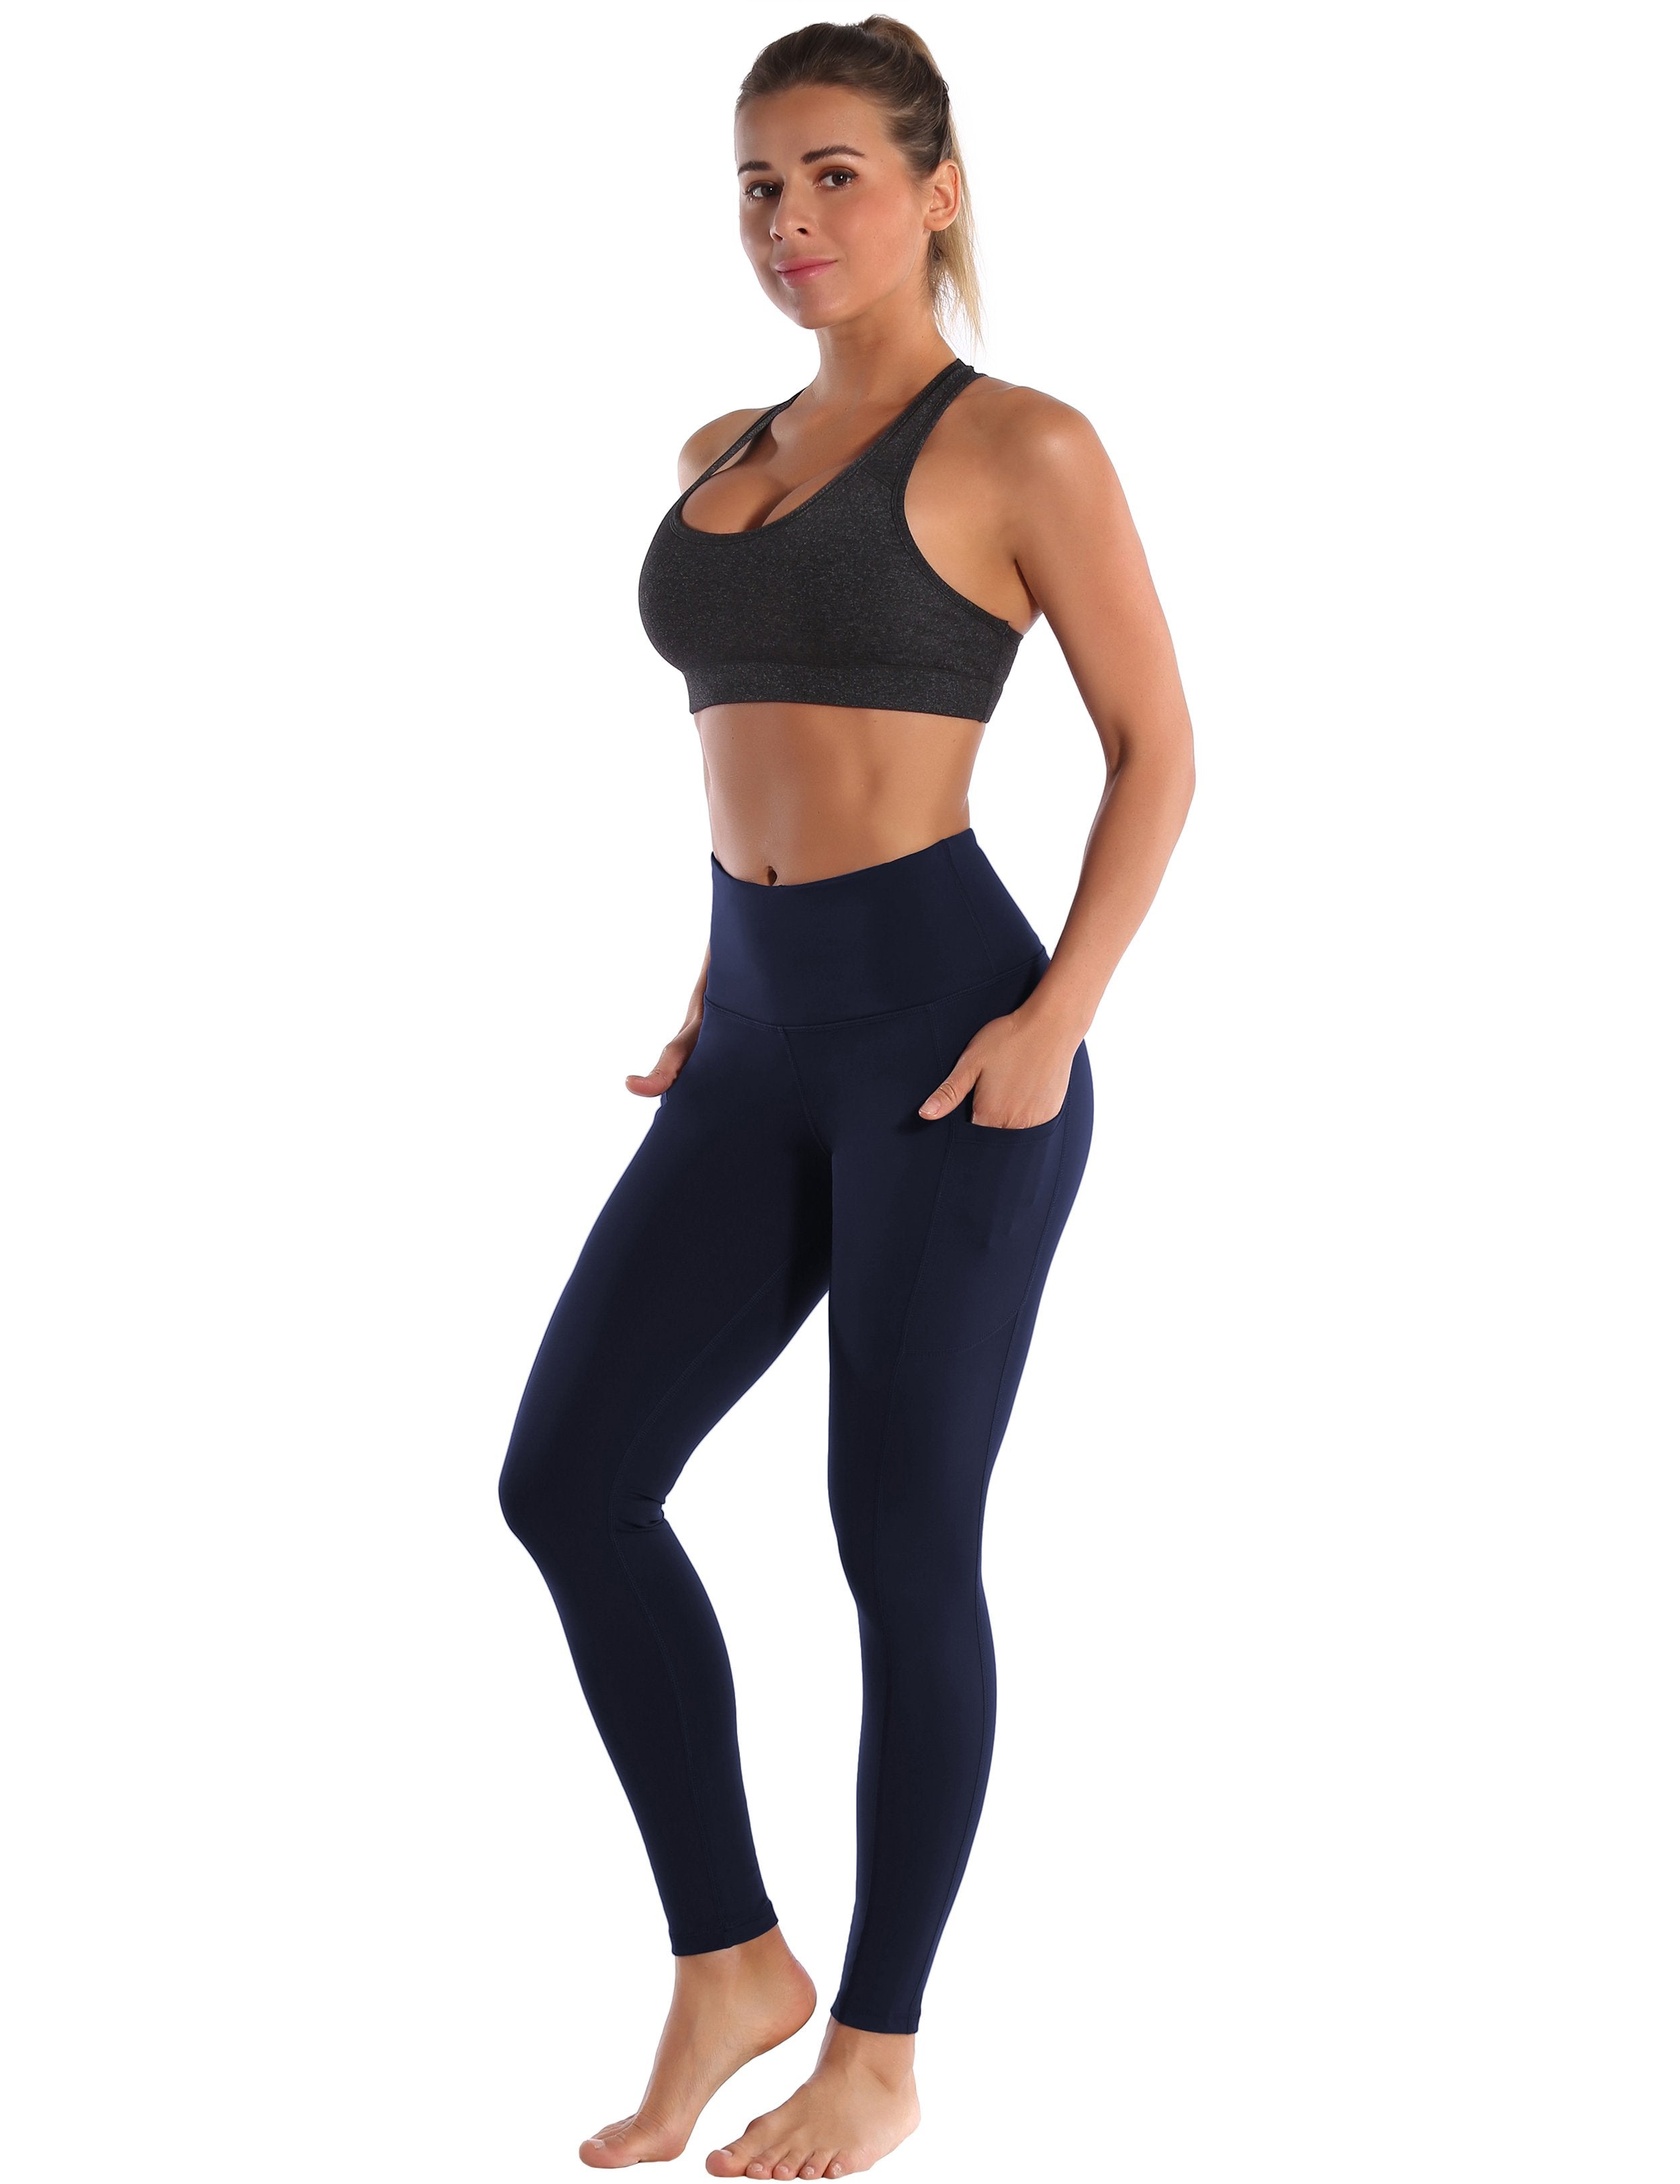 Hip Line Side Pockets Jogging Pants darknavy Sexy Hip Line Side Pockets 75%Nylon/25%Spandex Fabric doesn't attract lint easily 4-way stretch No see-through Moisture-wicking Tummy control Inner pocket Two lengths